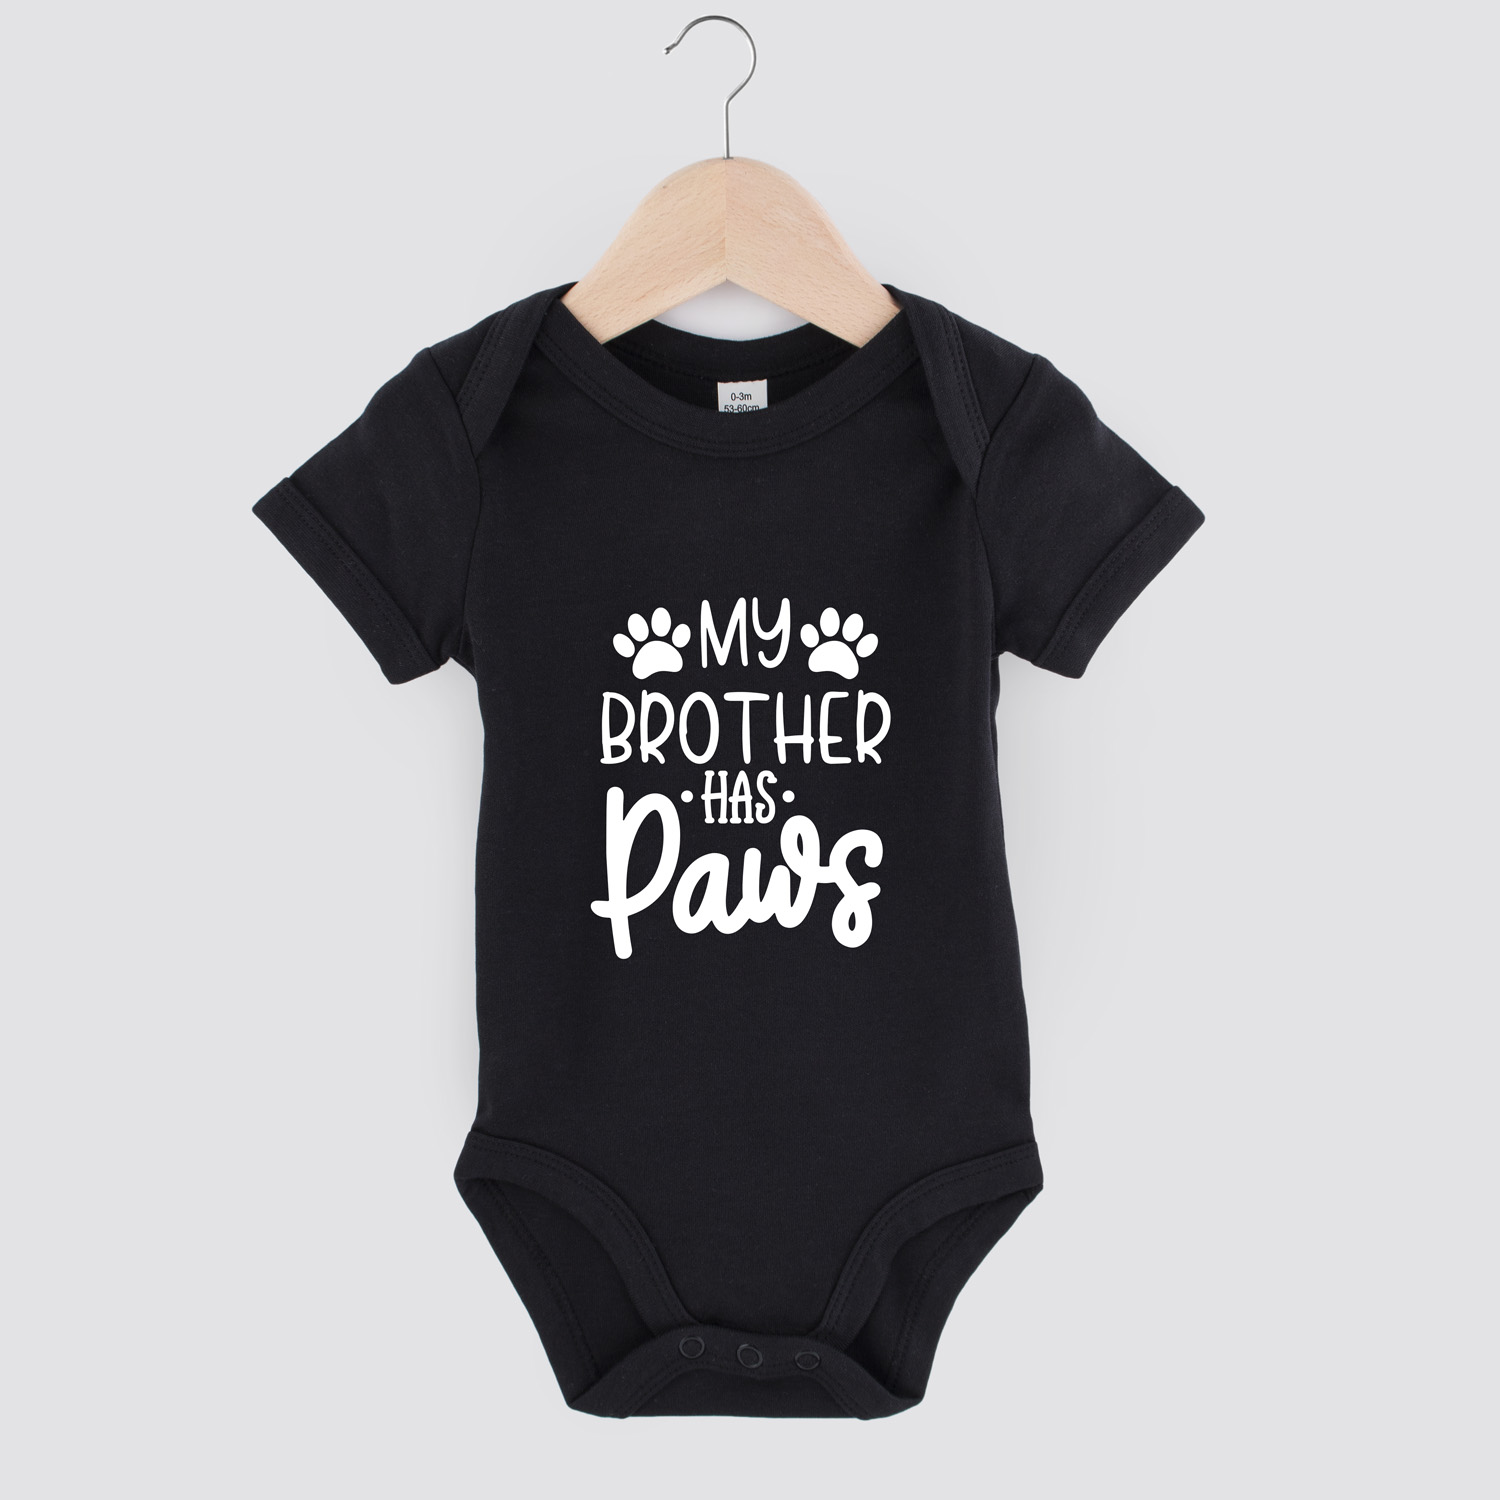 My brother has paws | Baby romper | my fabulous life.